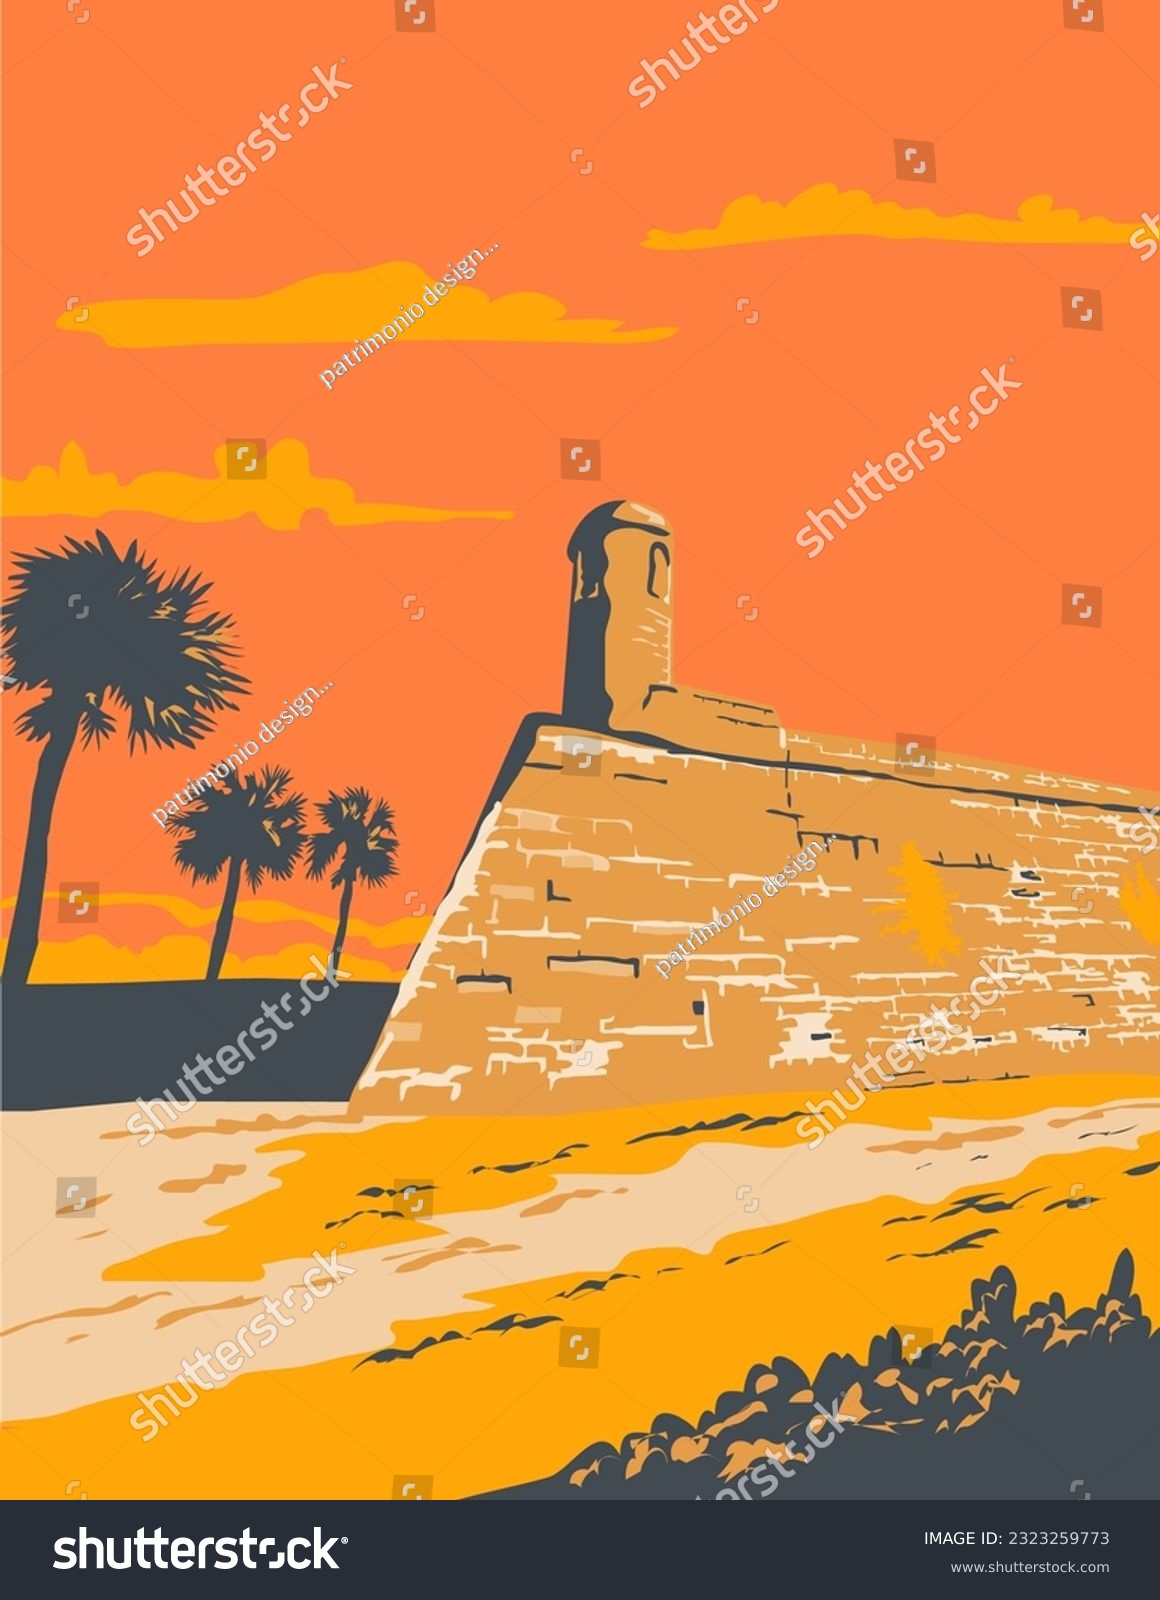 SVG of WPA style illustration of Fort Marion in St. Augustine Florida, United States the oldest place of European settlement on the North American Continent done in retro works progress administration style. svg